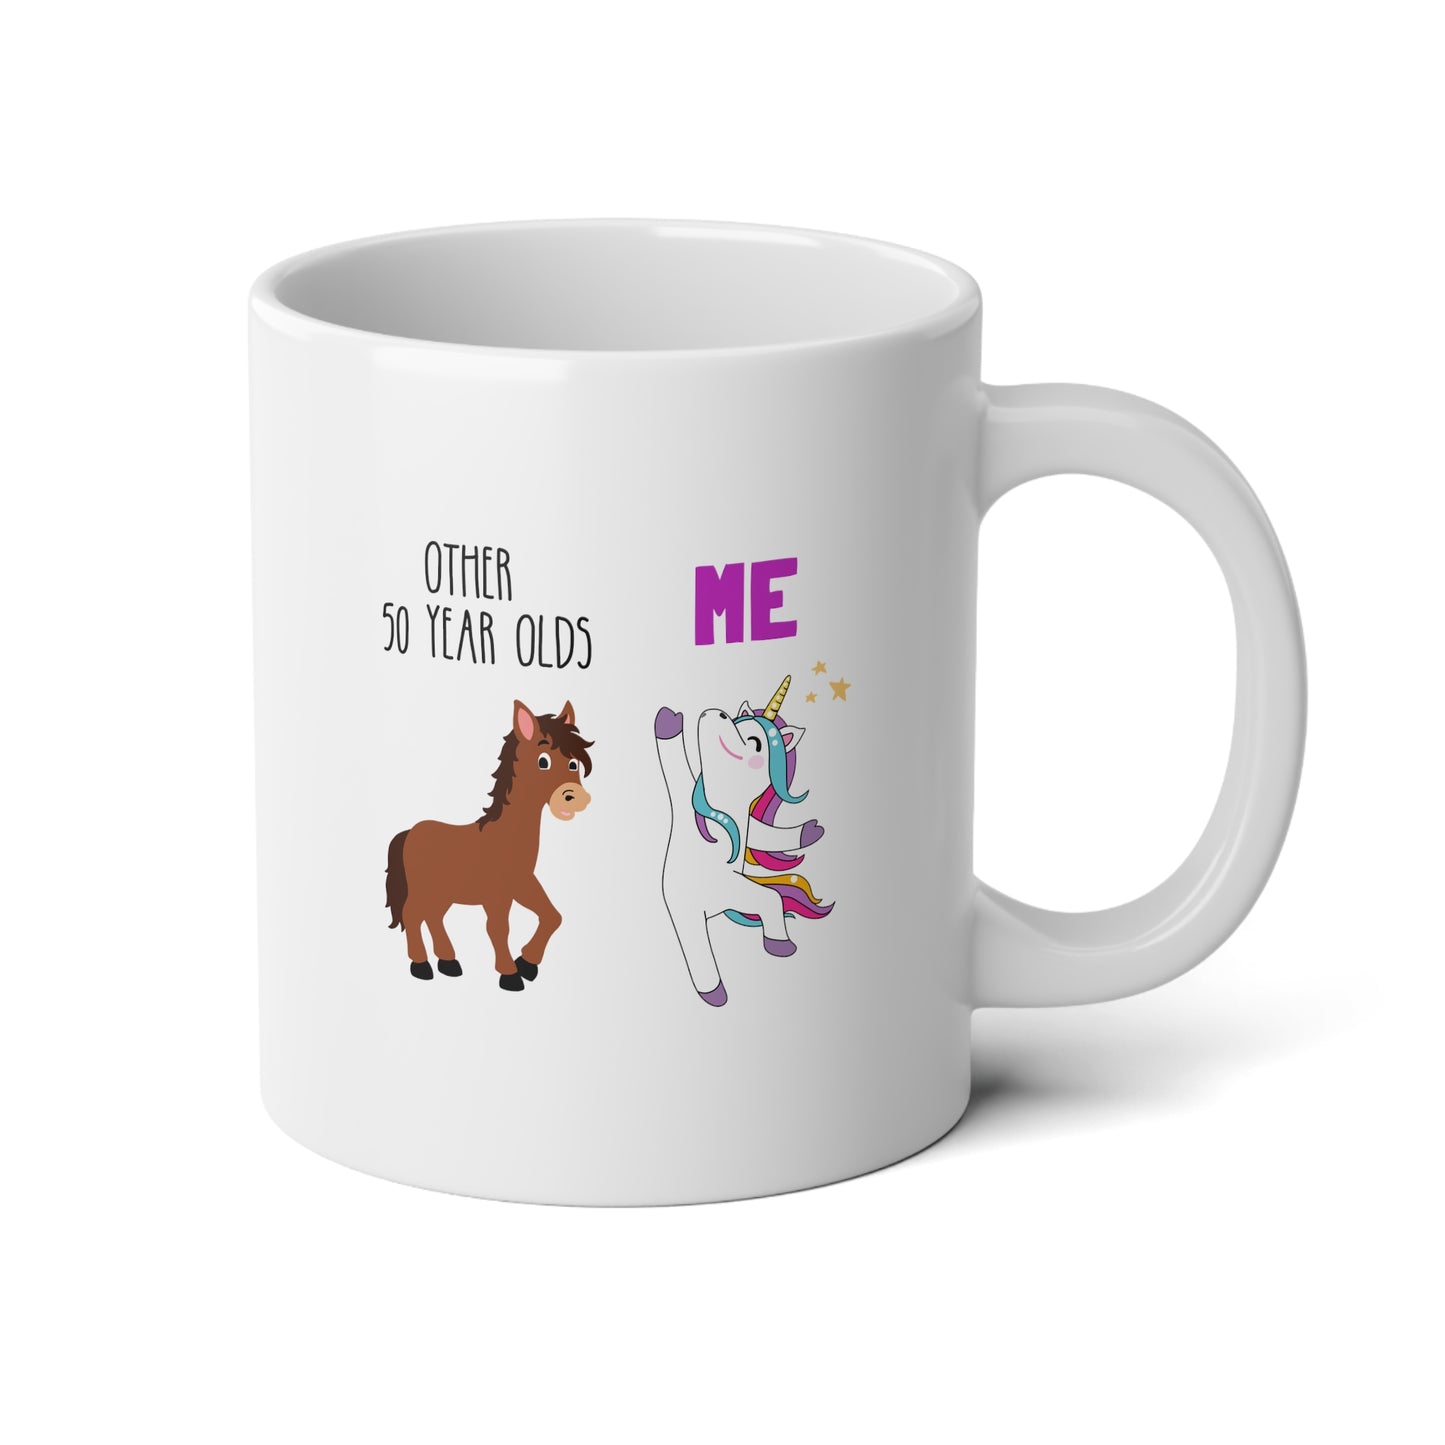 Other 50 Year Olds Vs Me 20oz white funny large coffee mug gift for friend family birthday personalized custom age horse unicorn waveywares wavey wares wavywares wavy wares